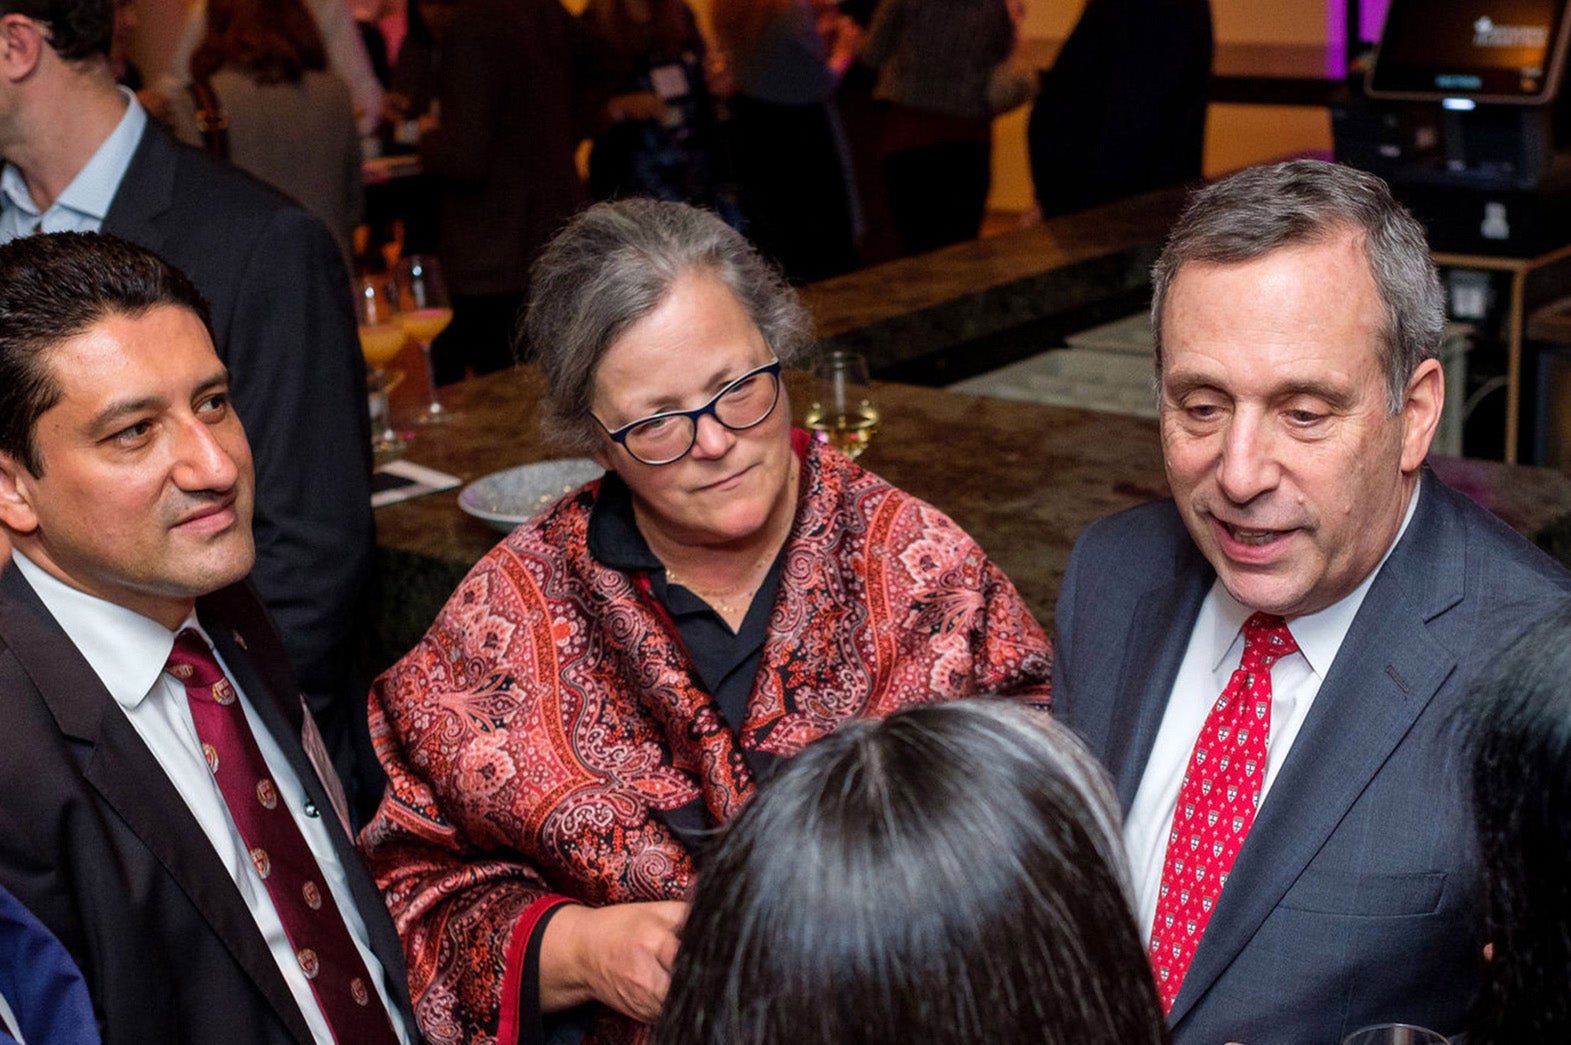 Victor Moscoso, Alice Hill, and Larry Bacow chat with conference-goers